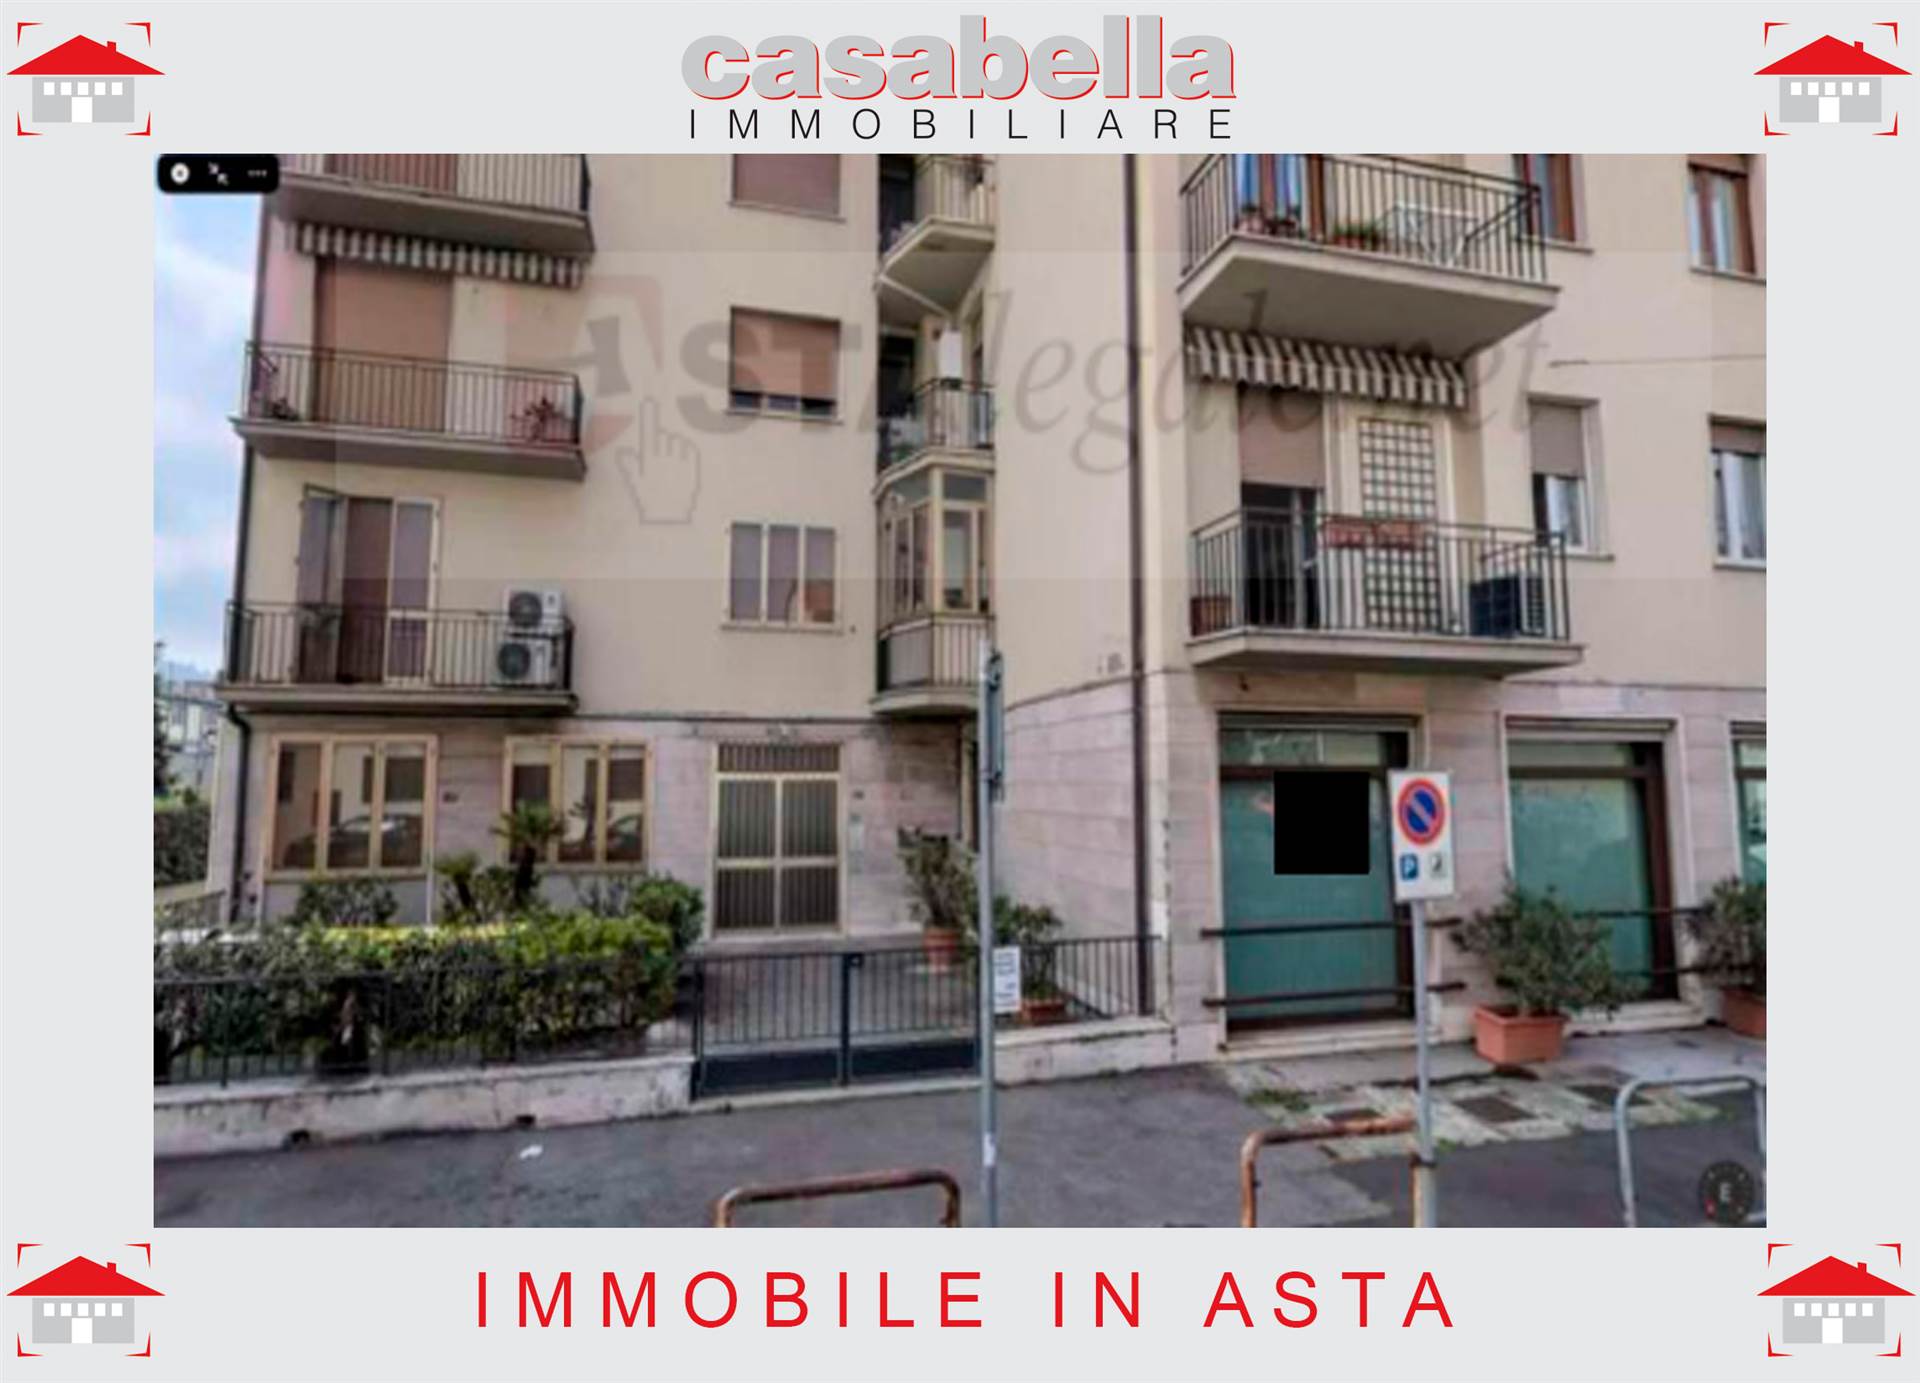 ZARINI, PRATO, Apartment for sale of 51 Sq. mt., Be restored, Heating Individual heating system, Energetic class: G, placed at Basement on 6, 